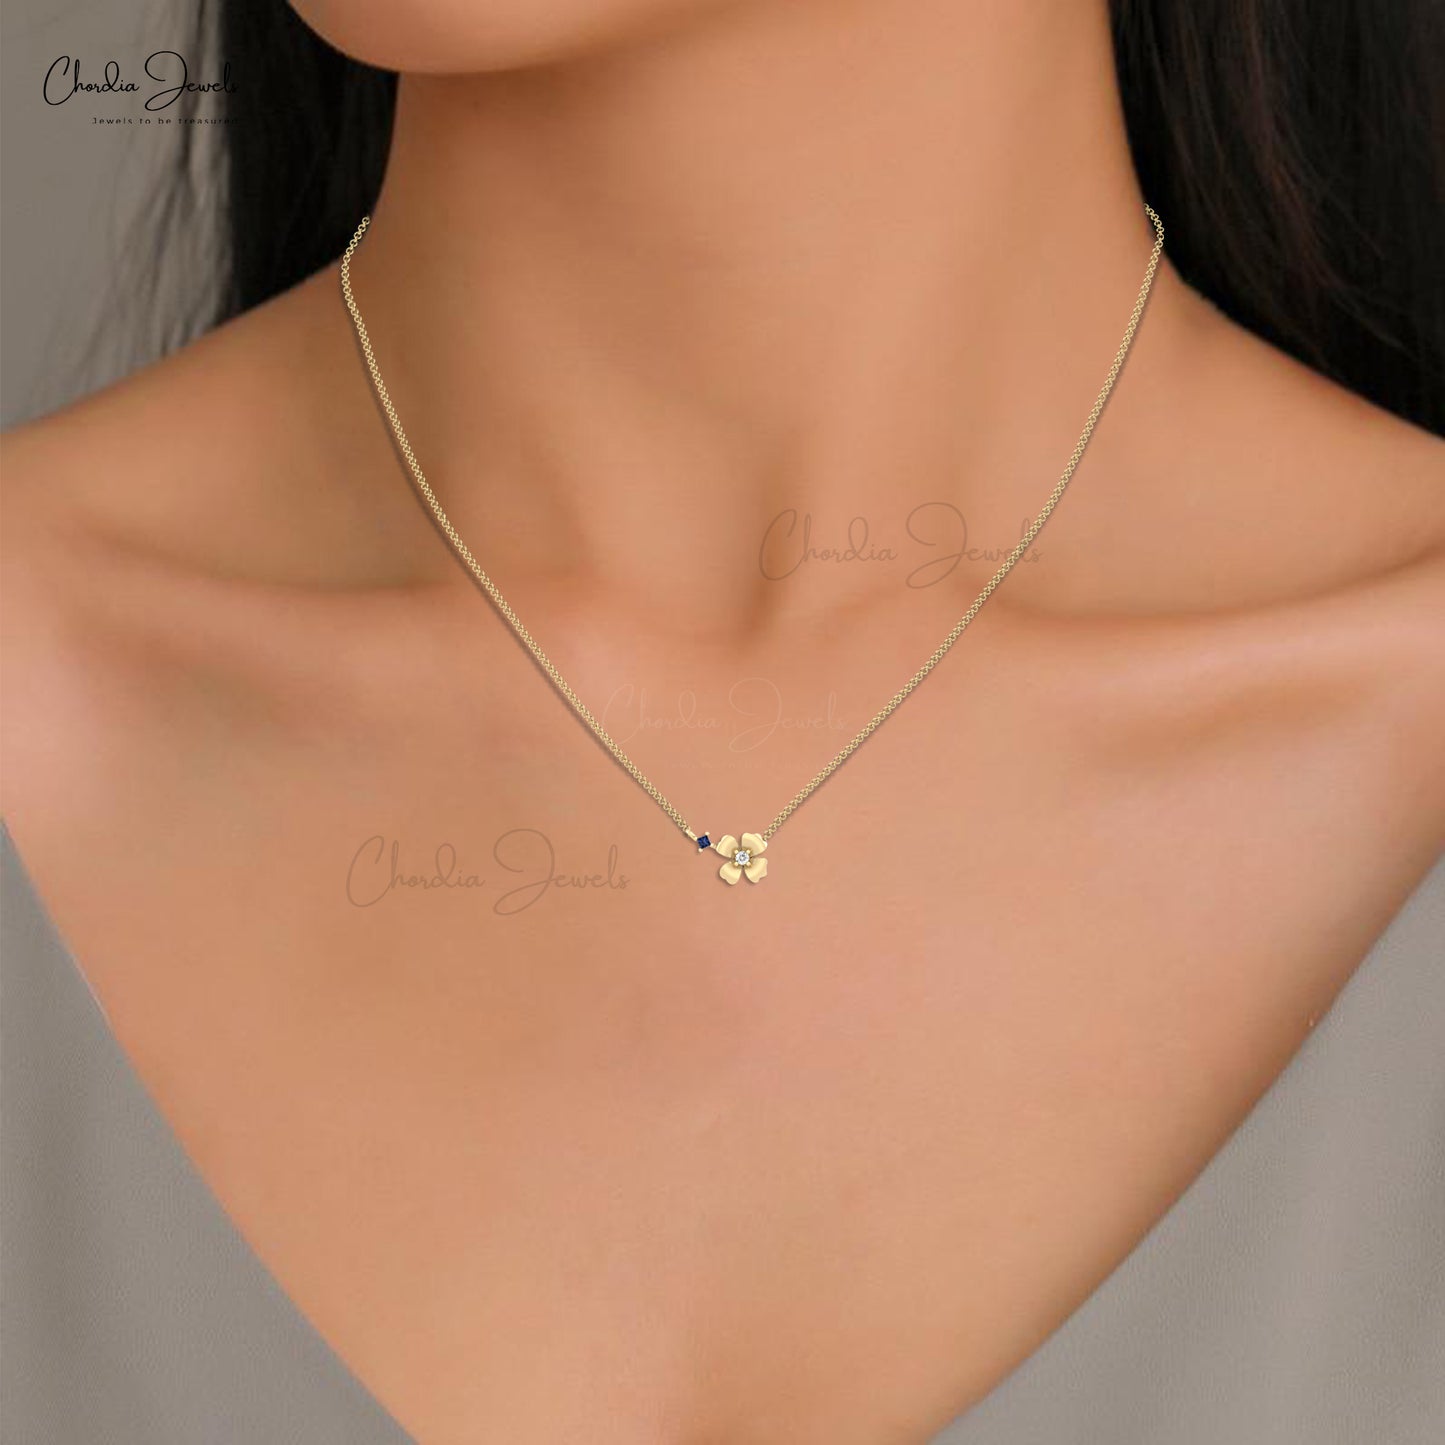 Unique Design Hot Sale Women Flower Shape Necklace Pendant Natural White Diamond and Blue Sapphire Necklace in 14k Pure Gold Gift For Her